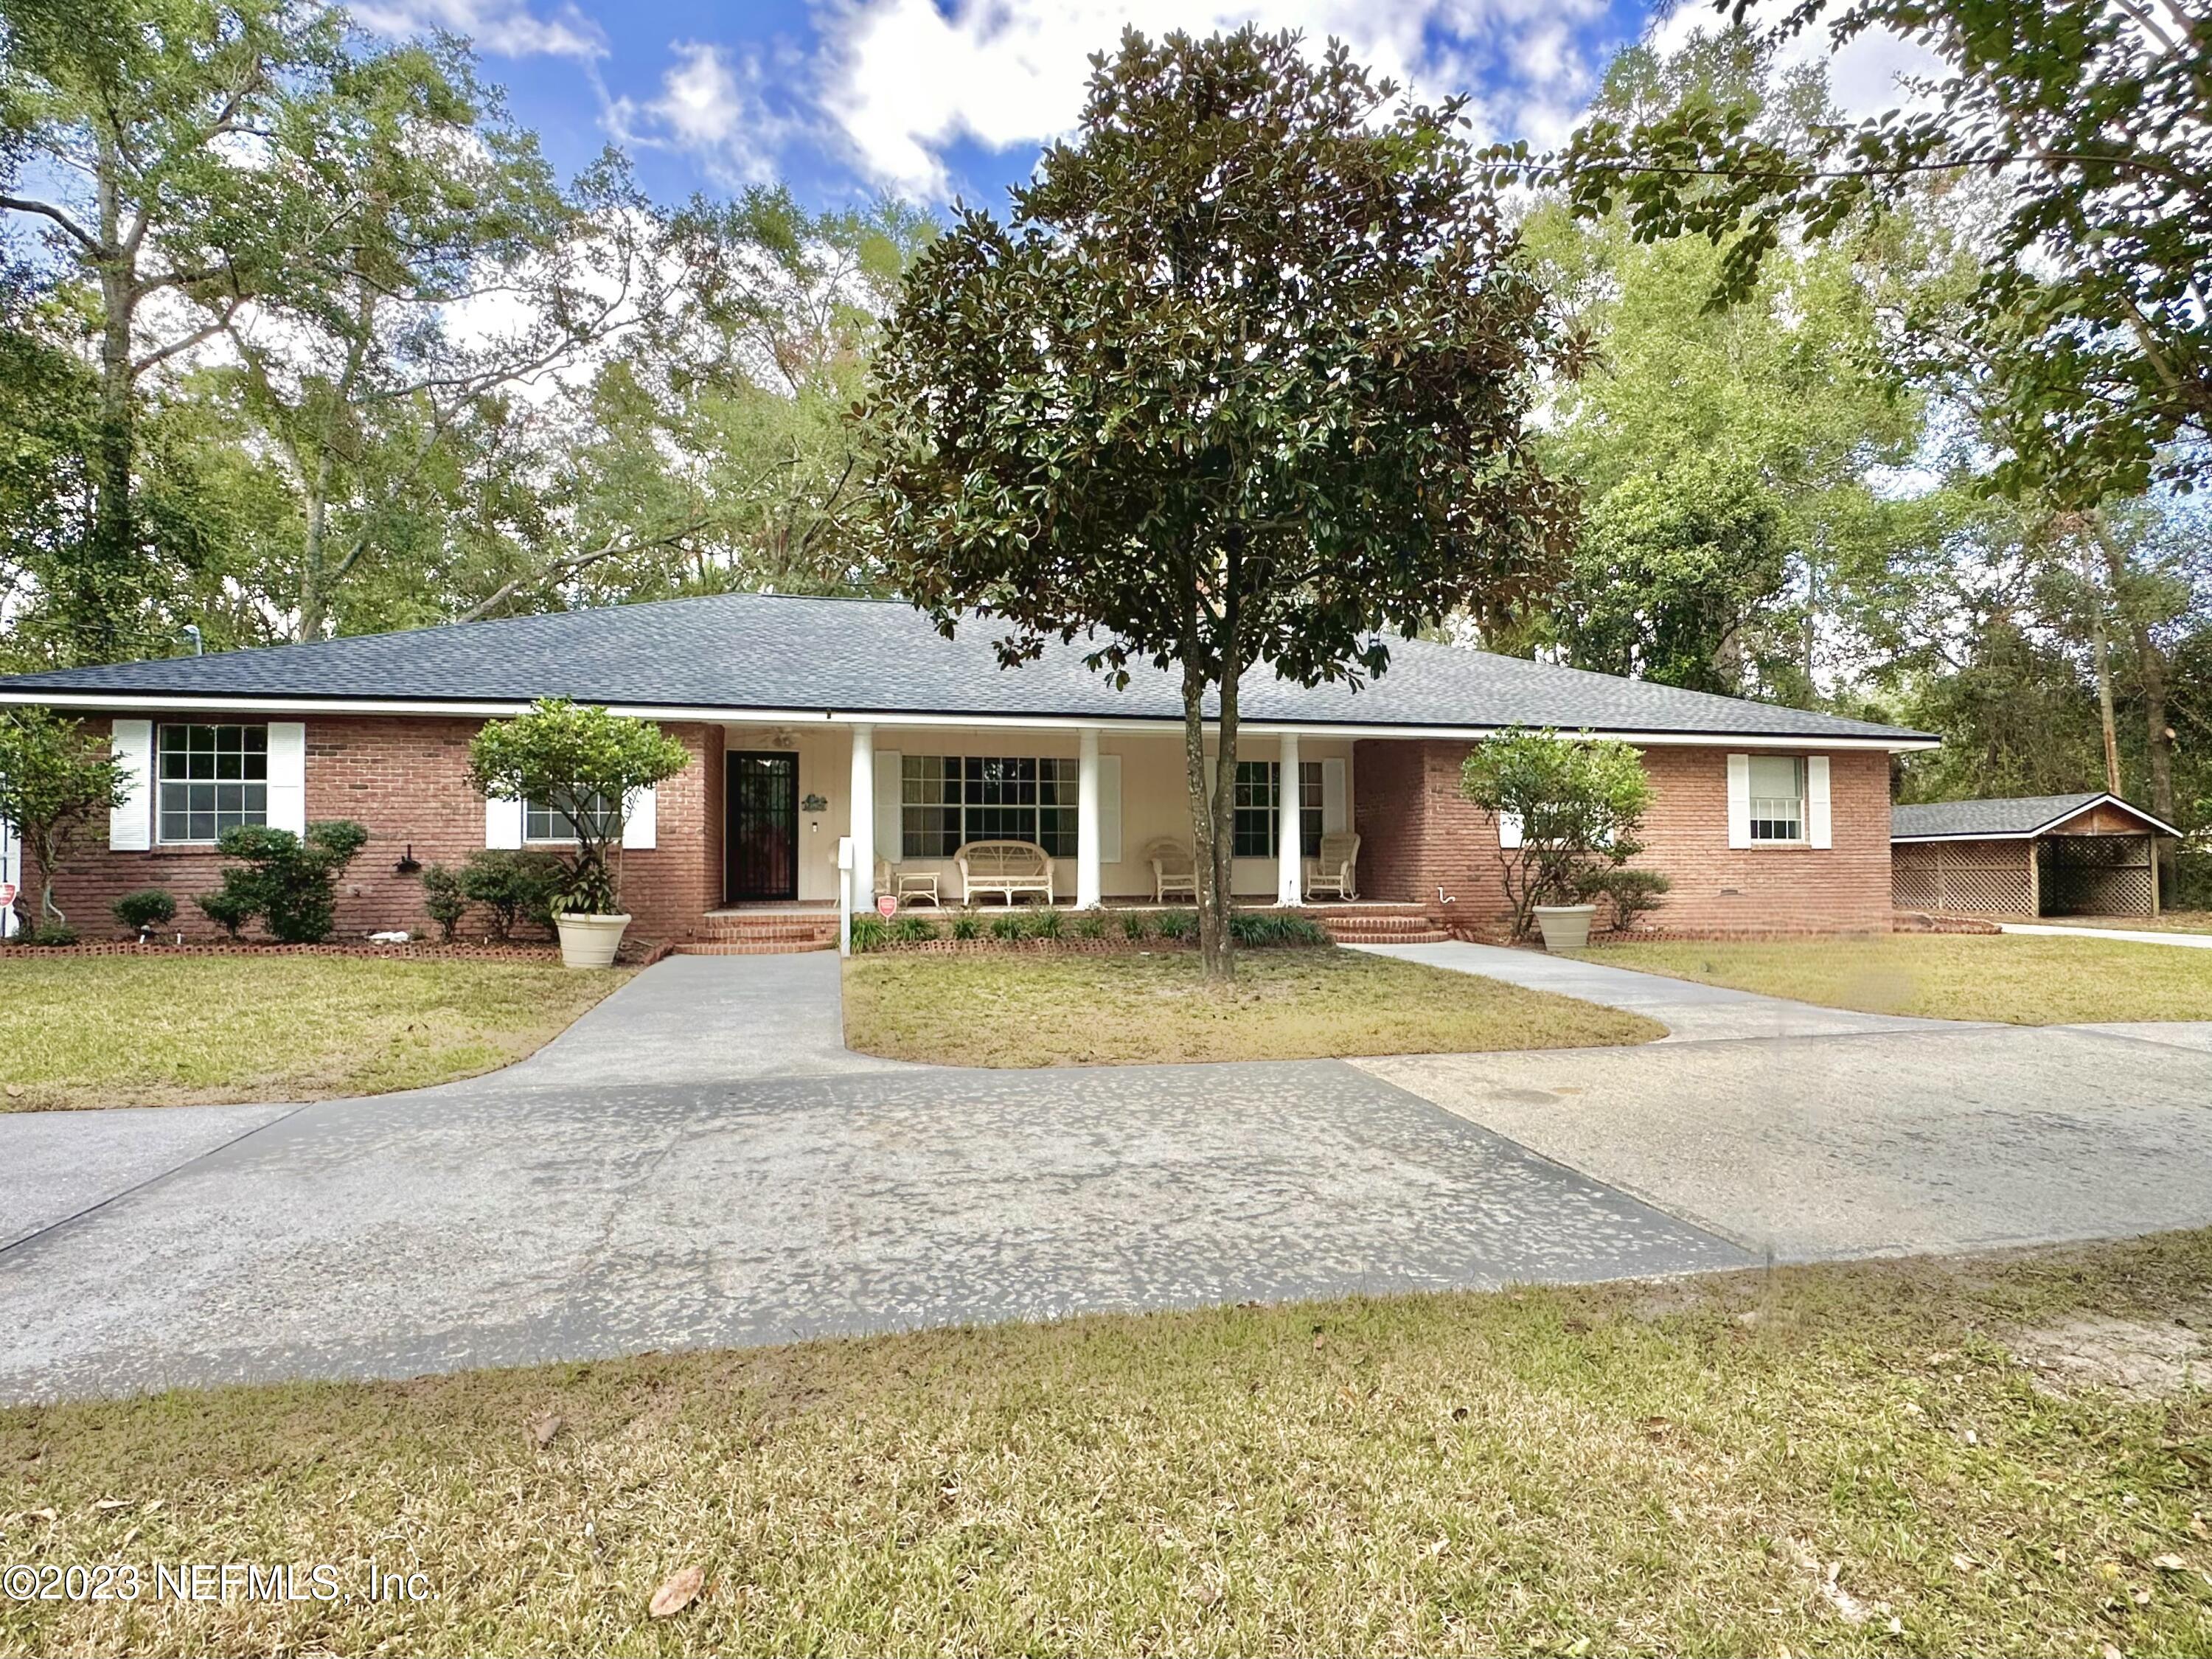 Lake City, FL home for sale located at 2145 SW LITTLE Road, Lake City, FL 32024